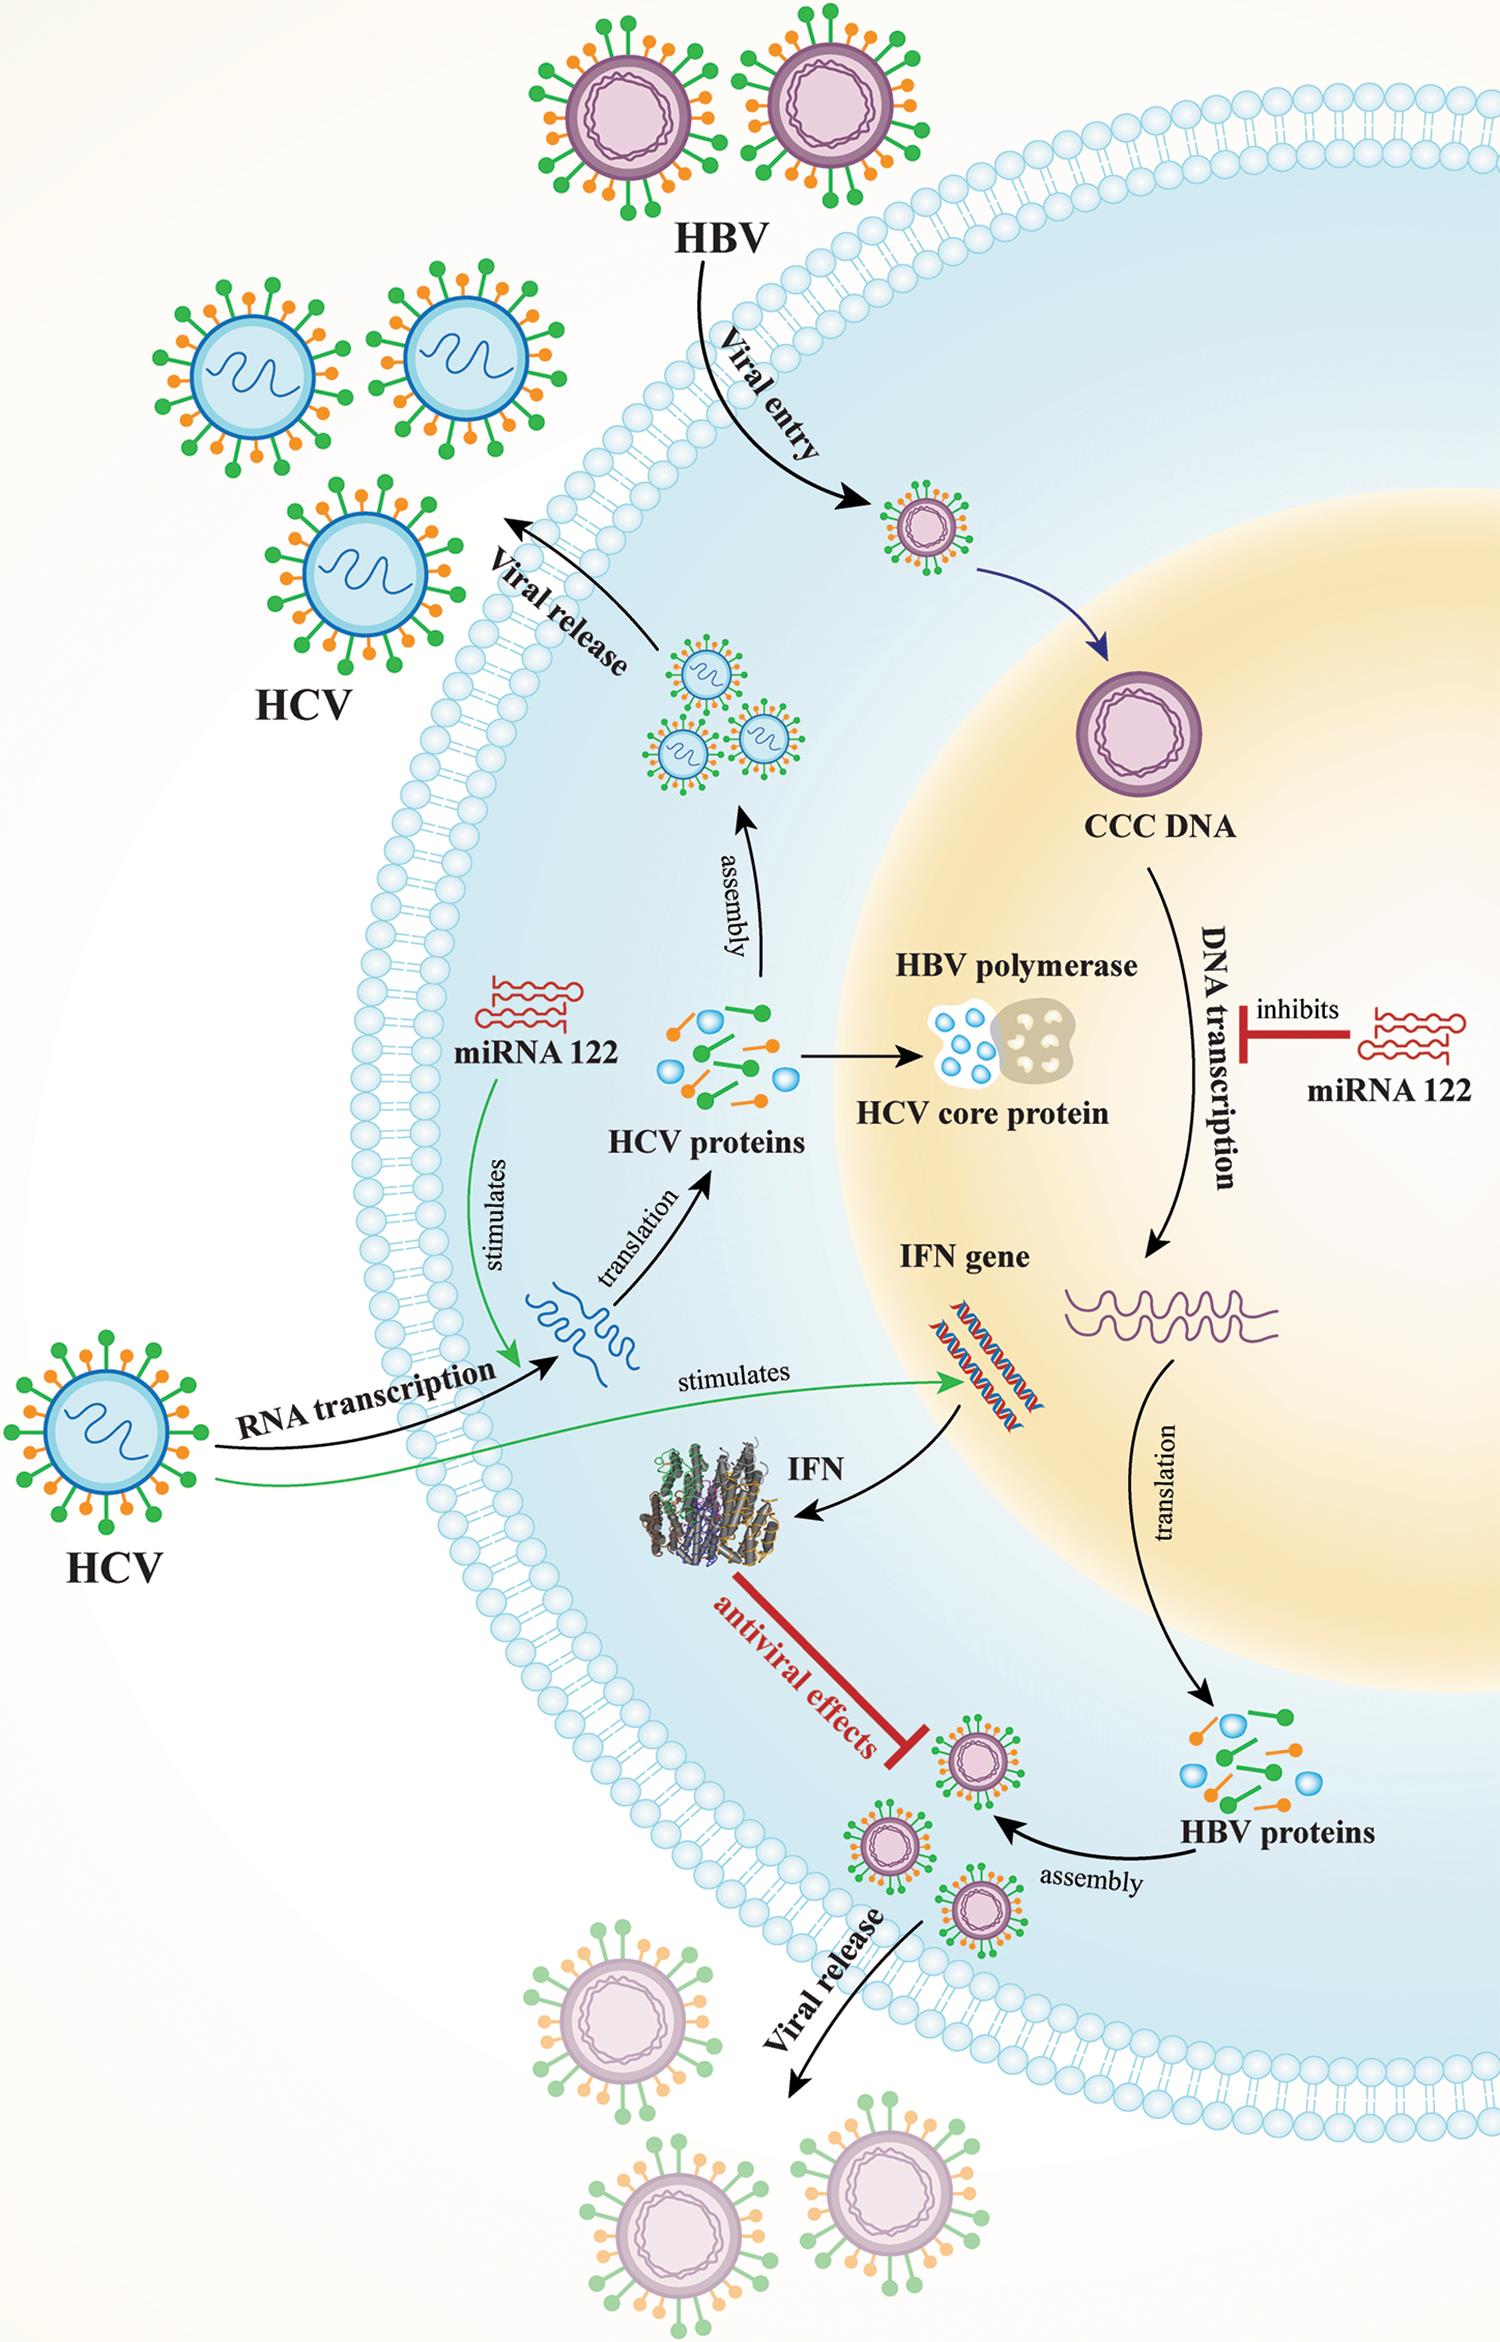 A depiction of three proposed mechanisms of HCV suppression of HBV replication.